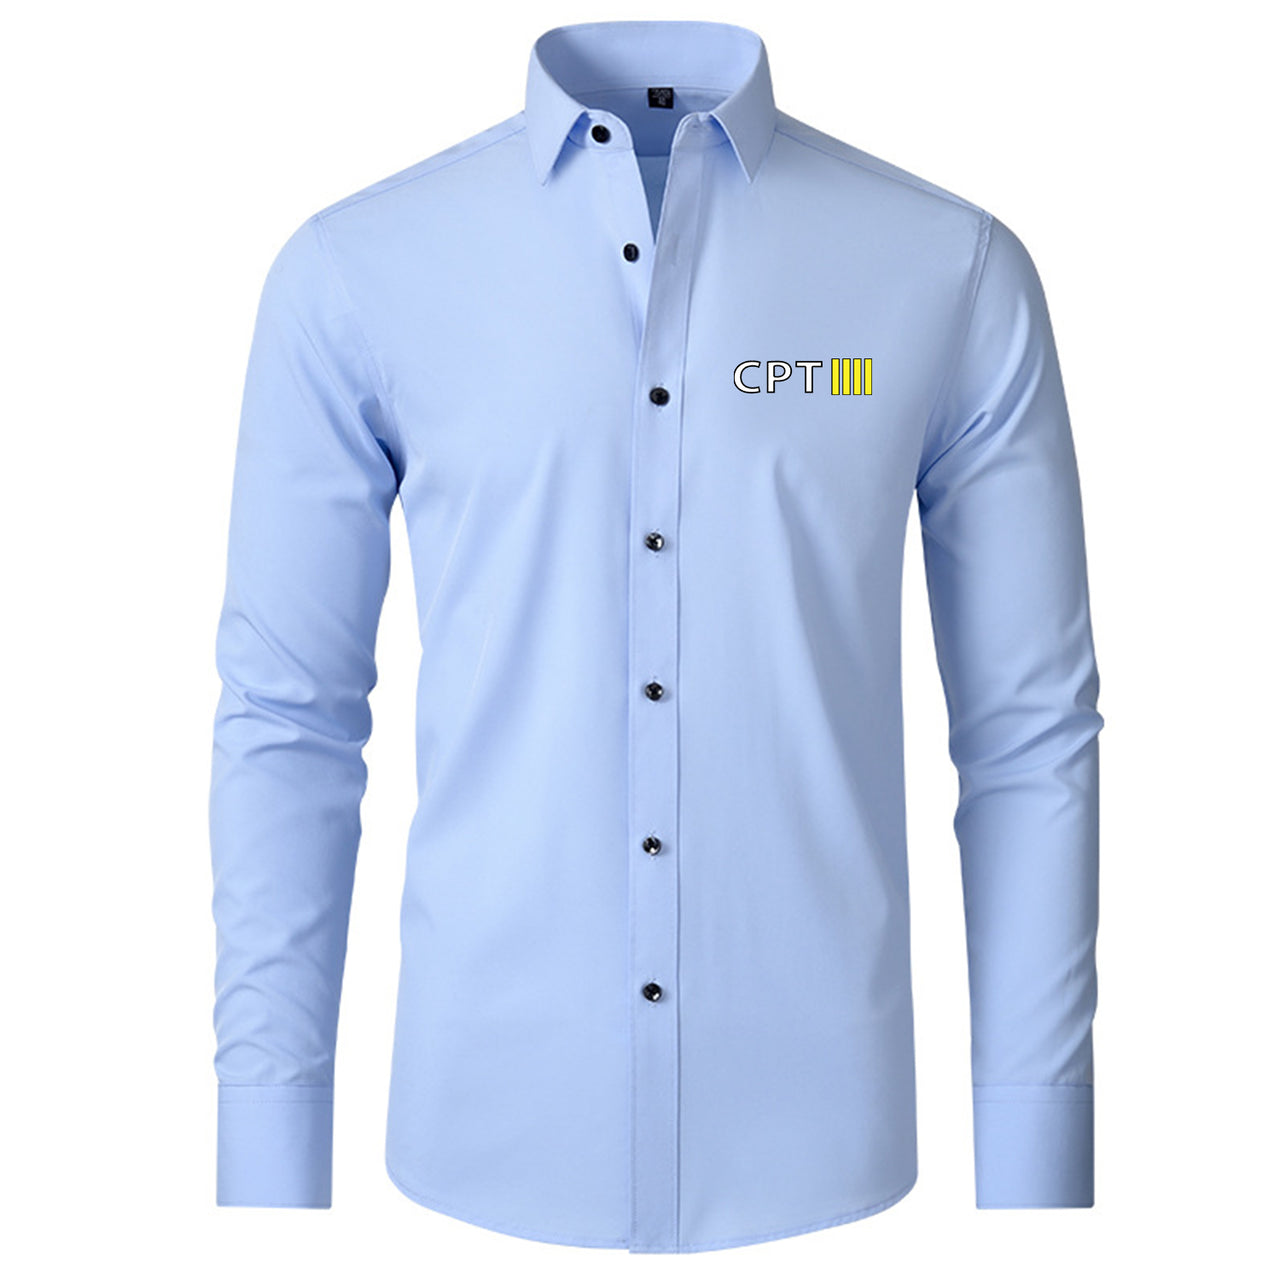 CPT & 4 Lines Designed Long Sleeve Shirts